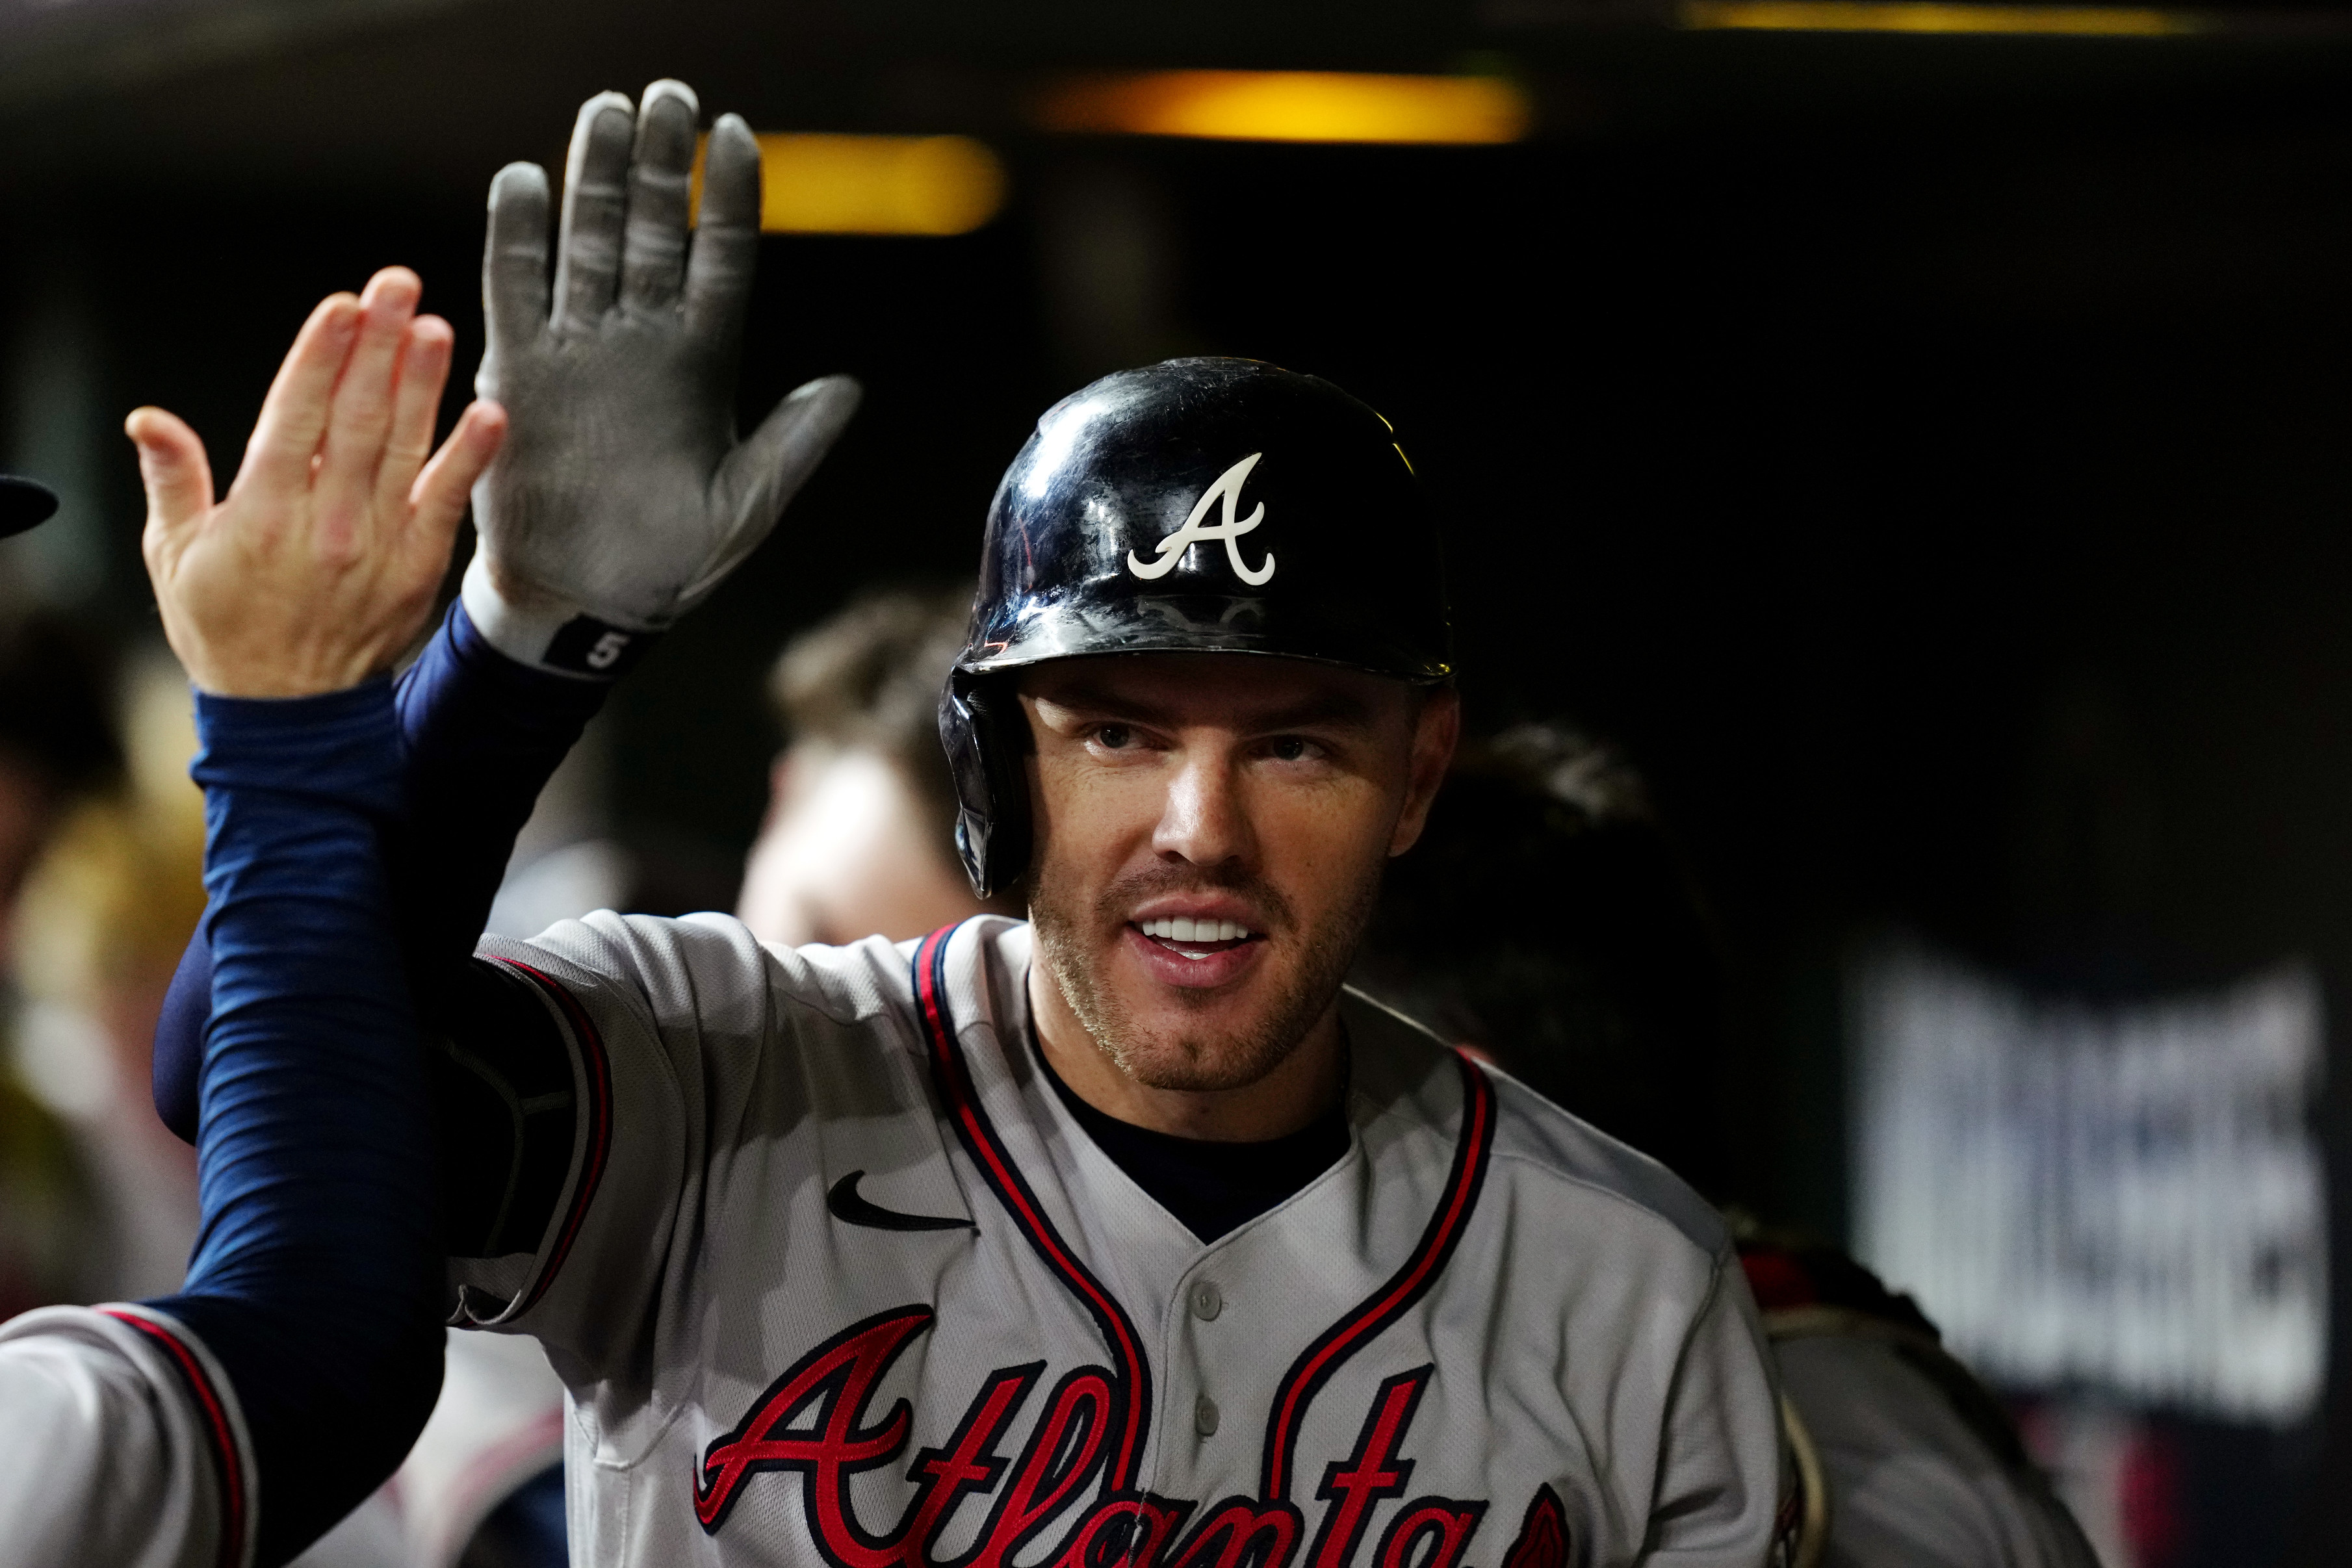 Freddie Freeman agrees to six year, $162M deal with Dodgers